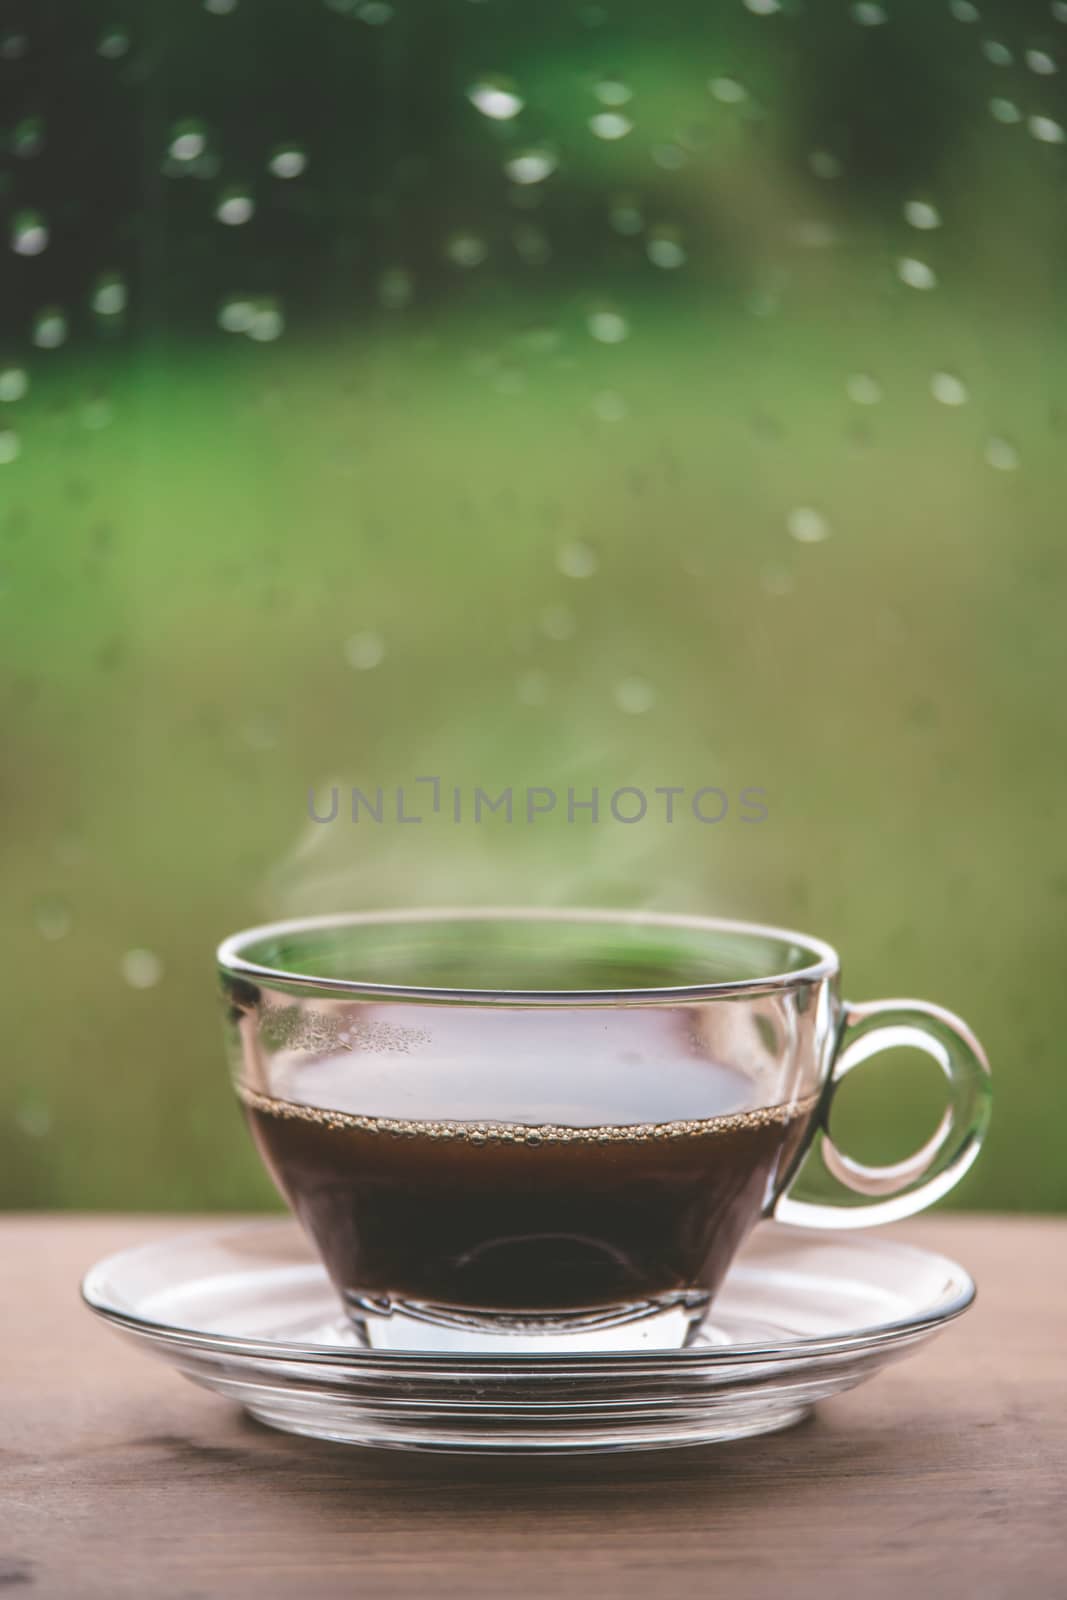 Cup of coffee on the table inside the window, coffee break in the morning with rainy day, relaxing and refreshing concepts.